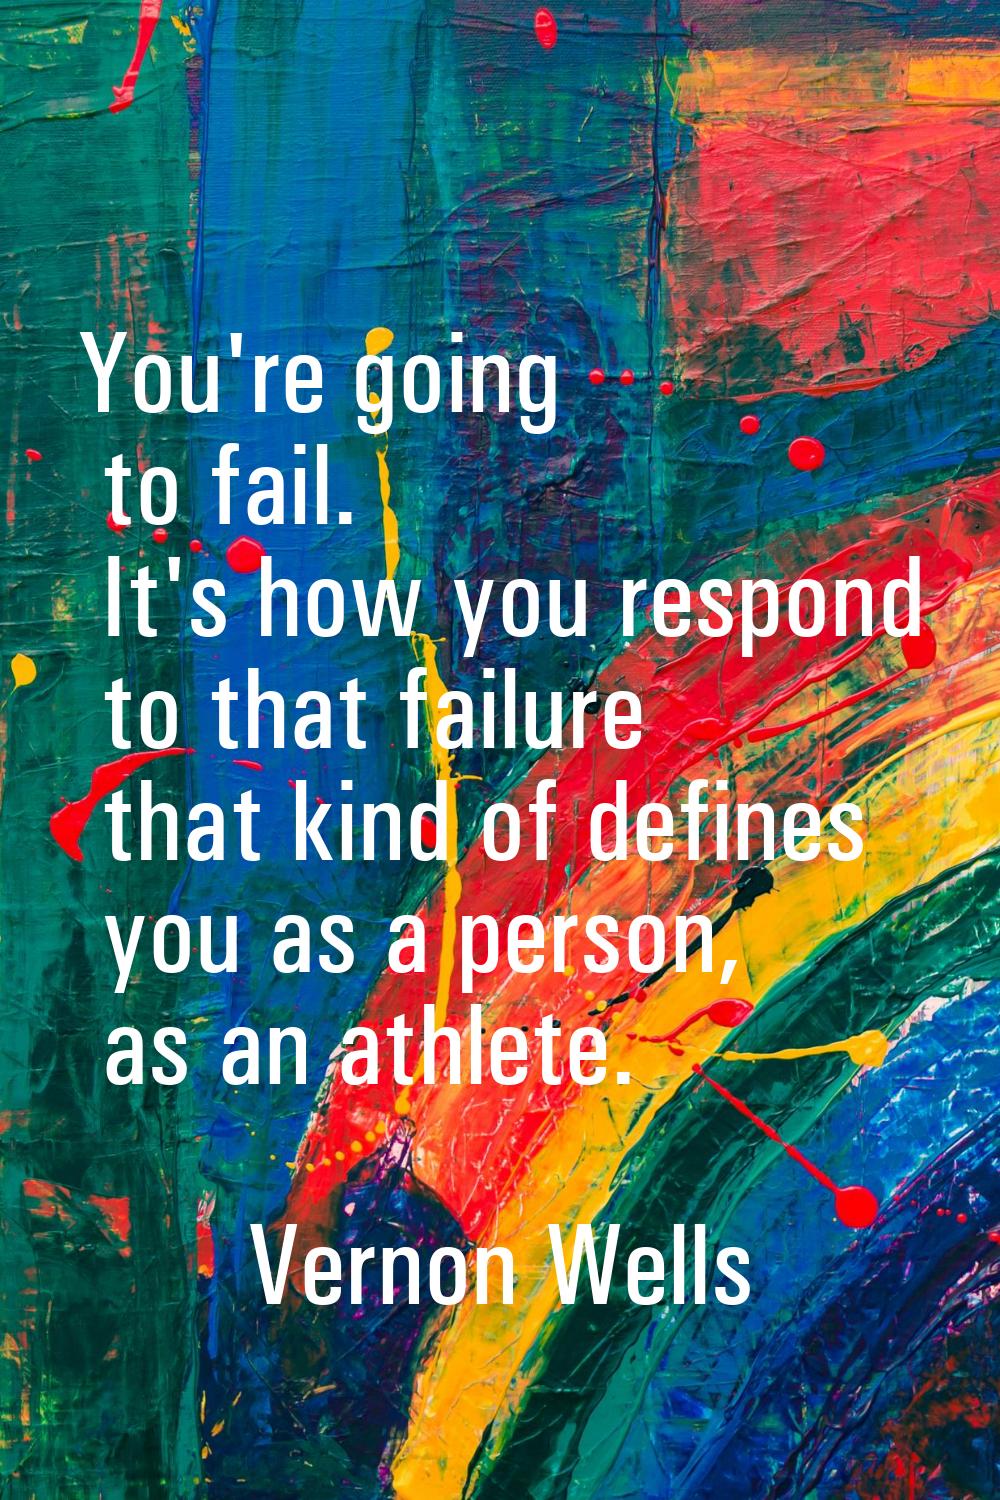 You're going to fail. It's how you respond to that failure that kind of defines you as a person, as